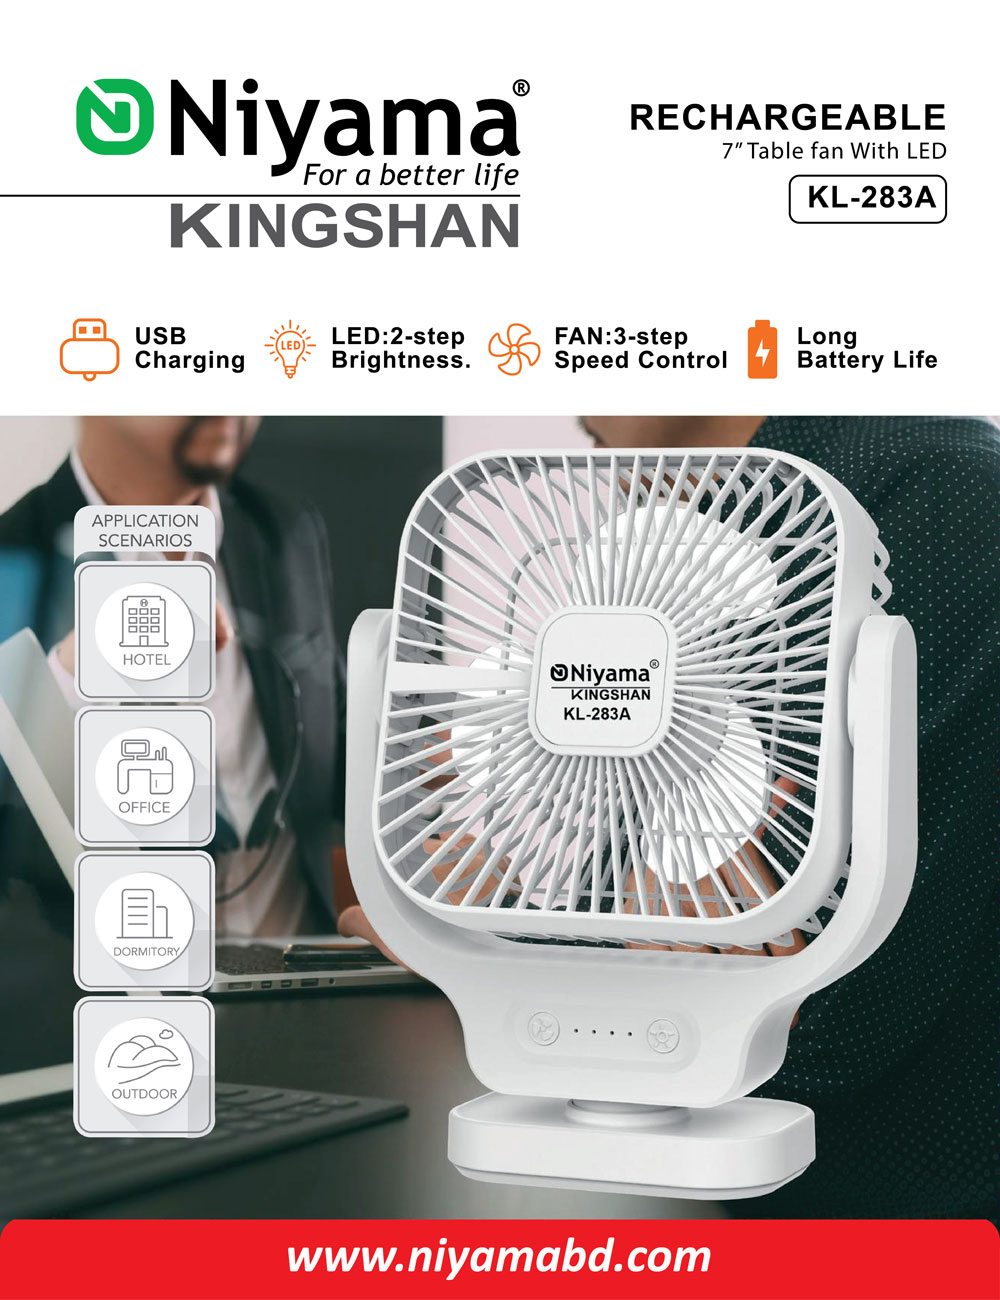 Stay Cool Anywhere You Go with the KL-283A Rechargeable Mini Fan!